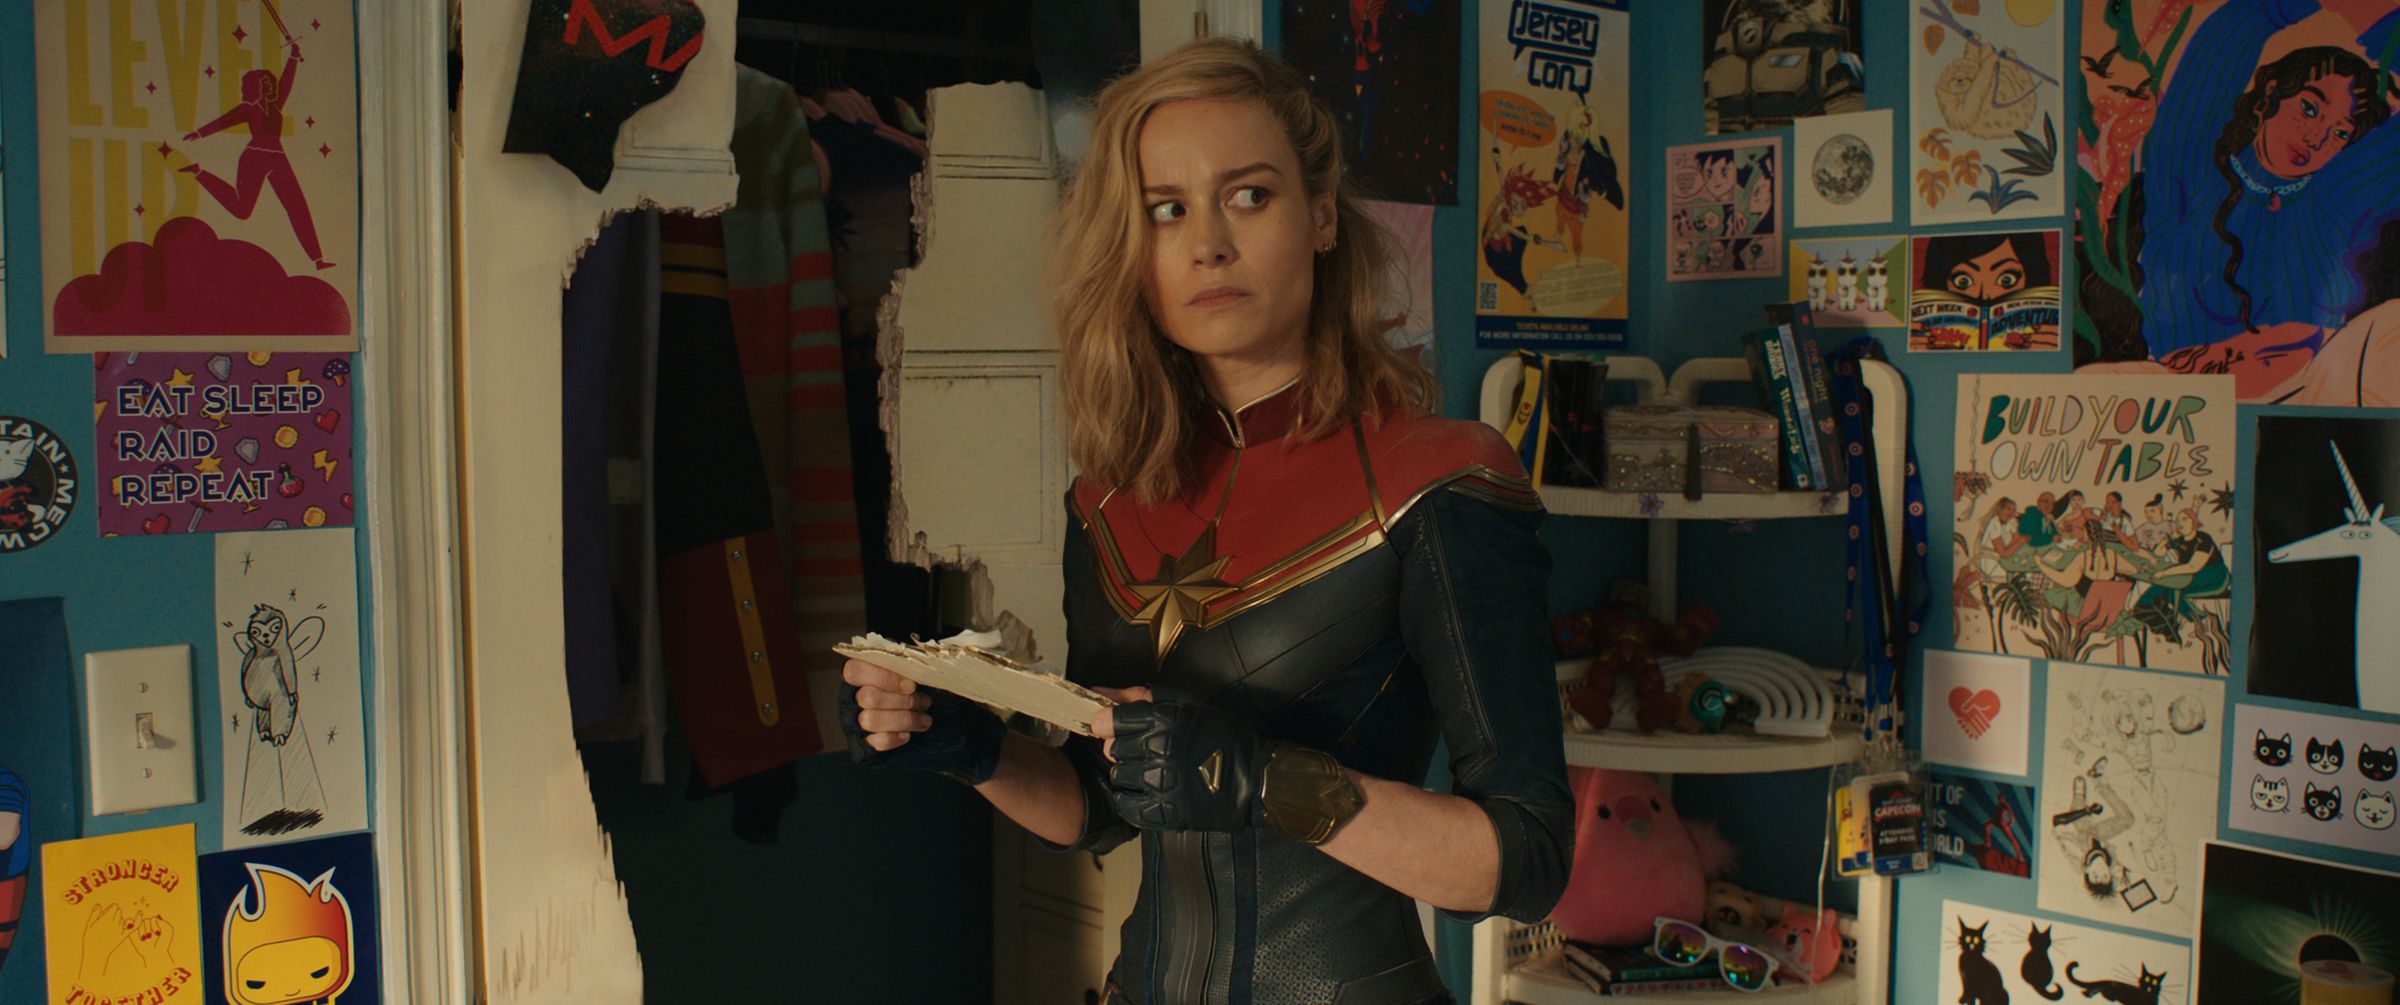 A woman in a form-fitting superhero costume standing in a bedroom whose walls are plastered with drawings of her.